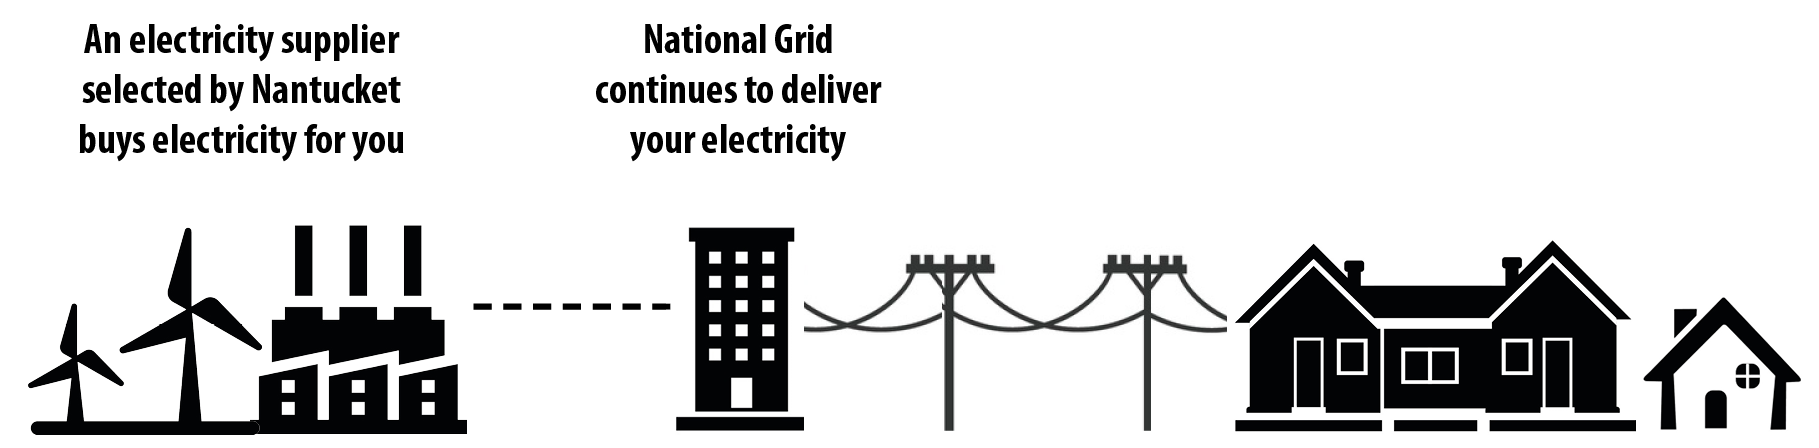 Diagram showing an electricity supplier, National Grid, and the Town of Nantucket 